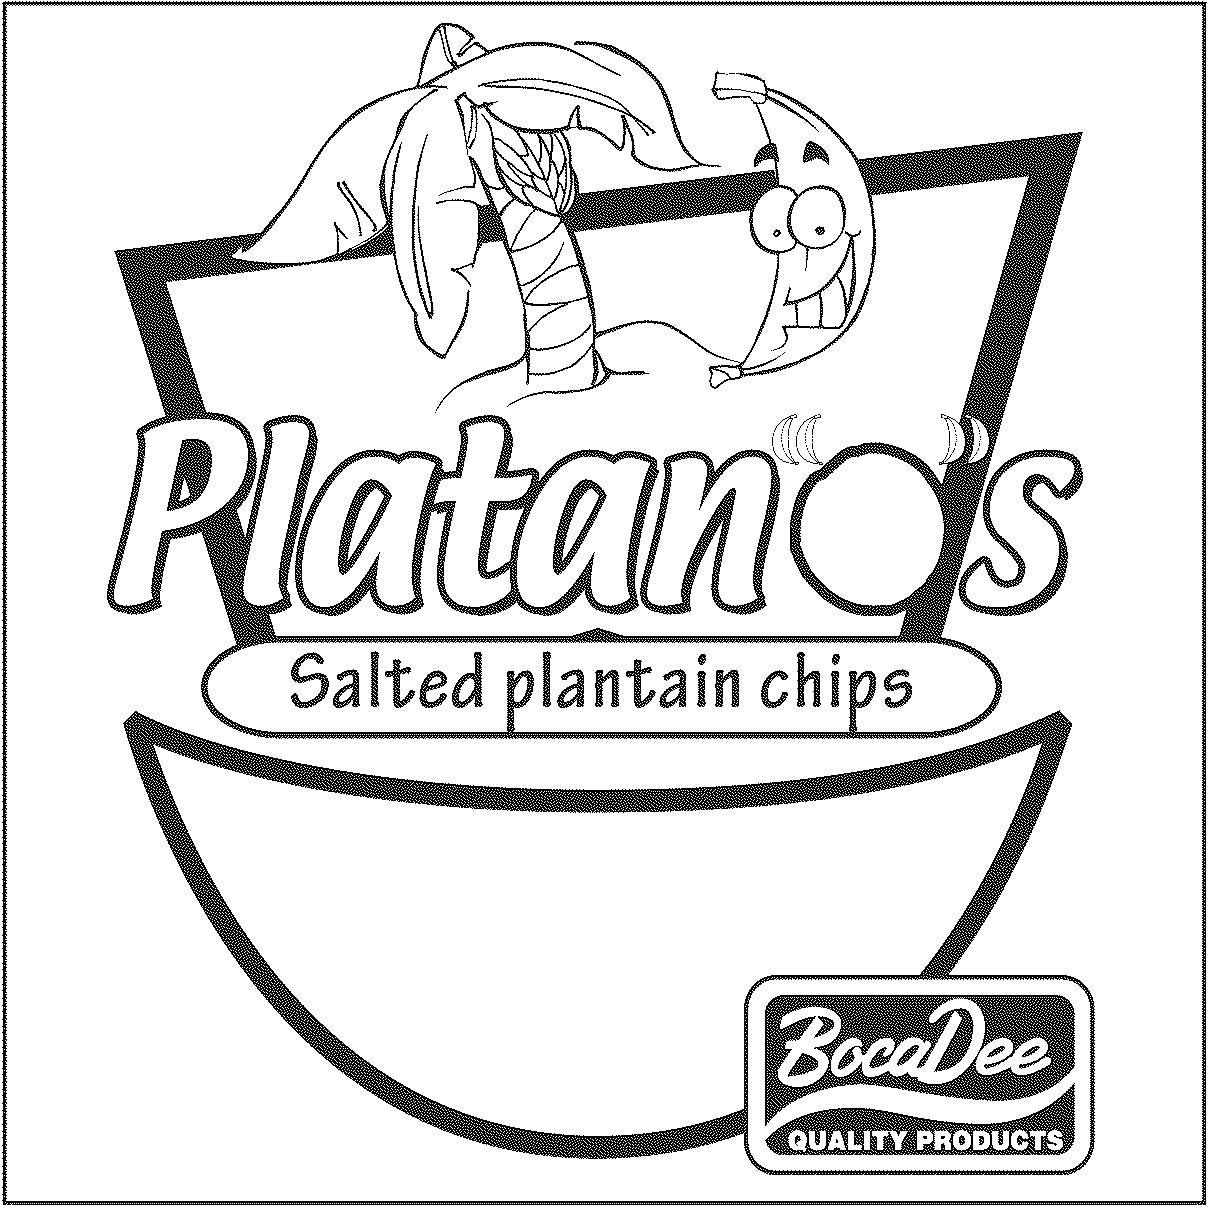  PLATANOS SALTED PLANTAIN CHIPS BACADEE QUALITY PRODUCTS